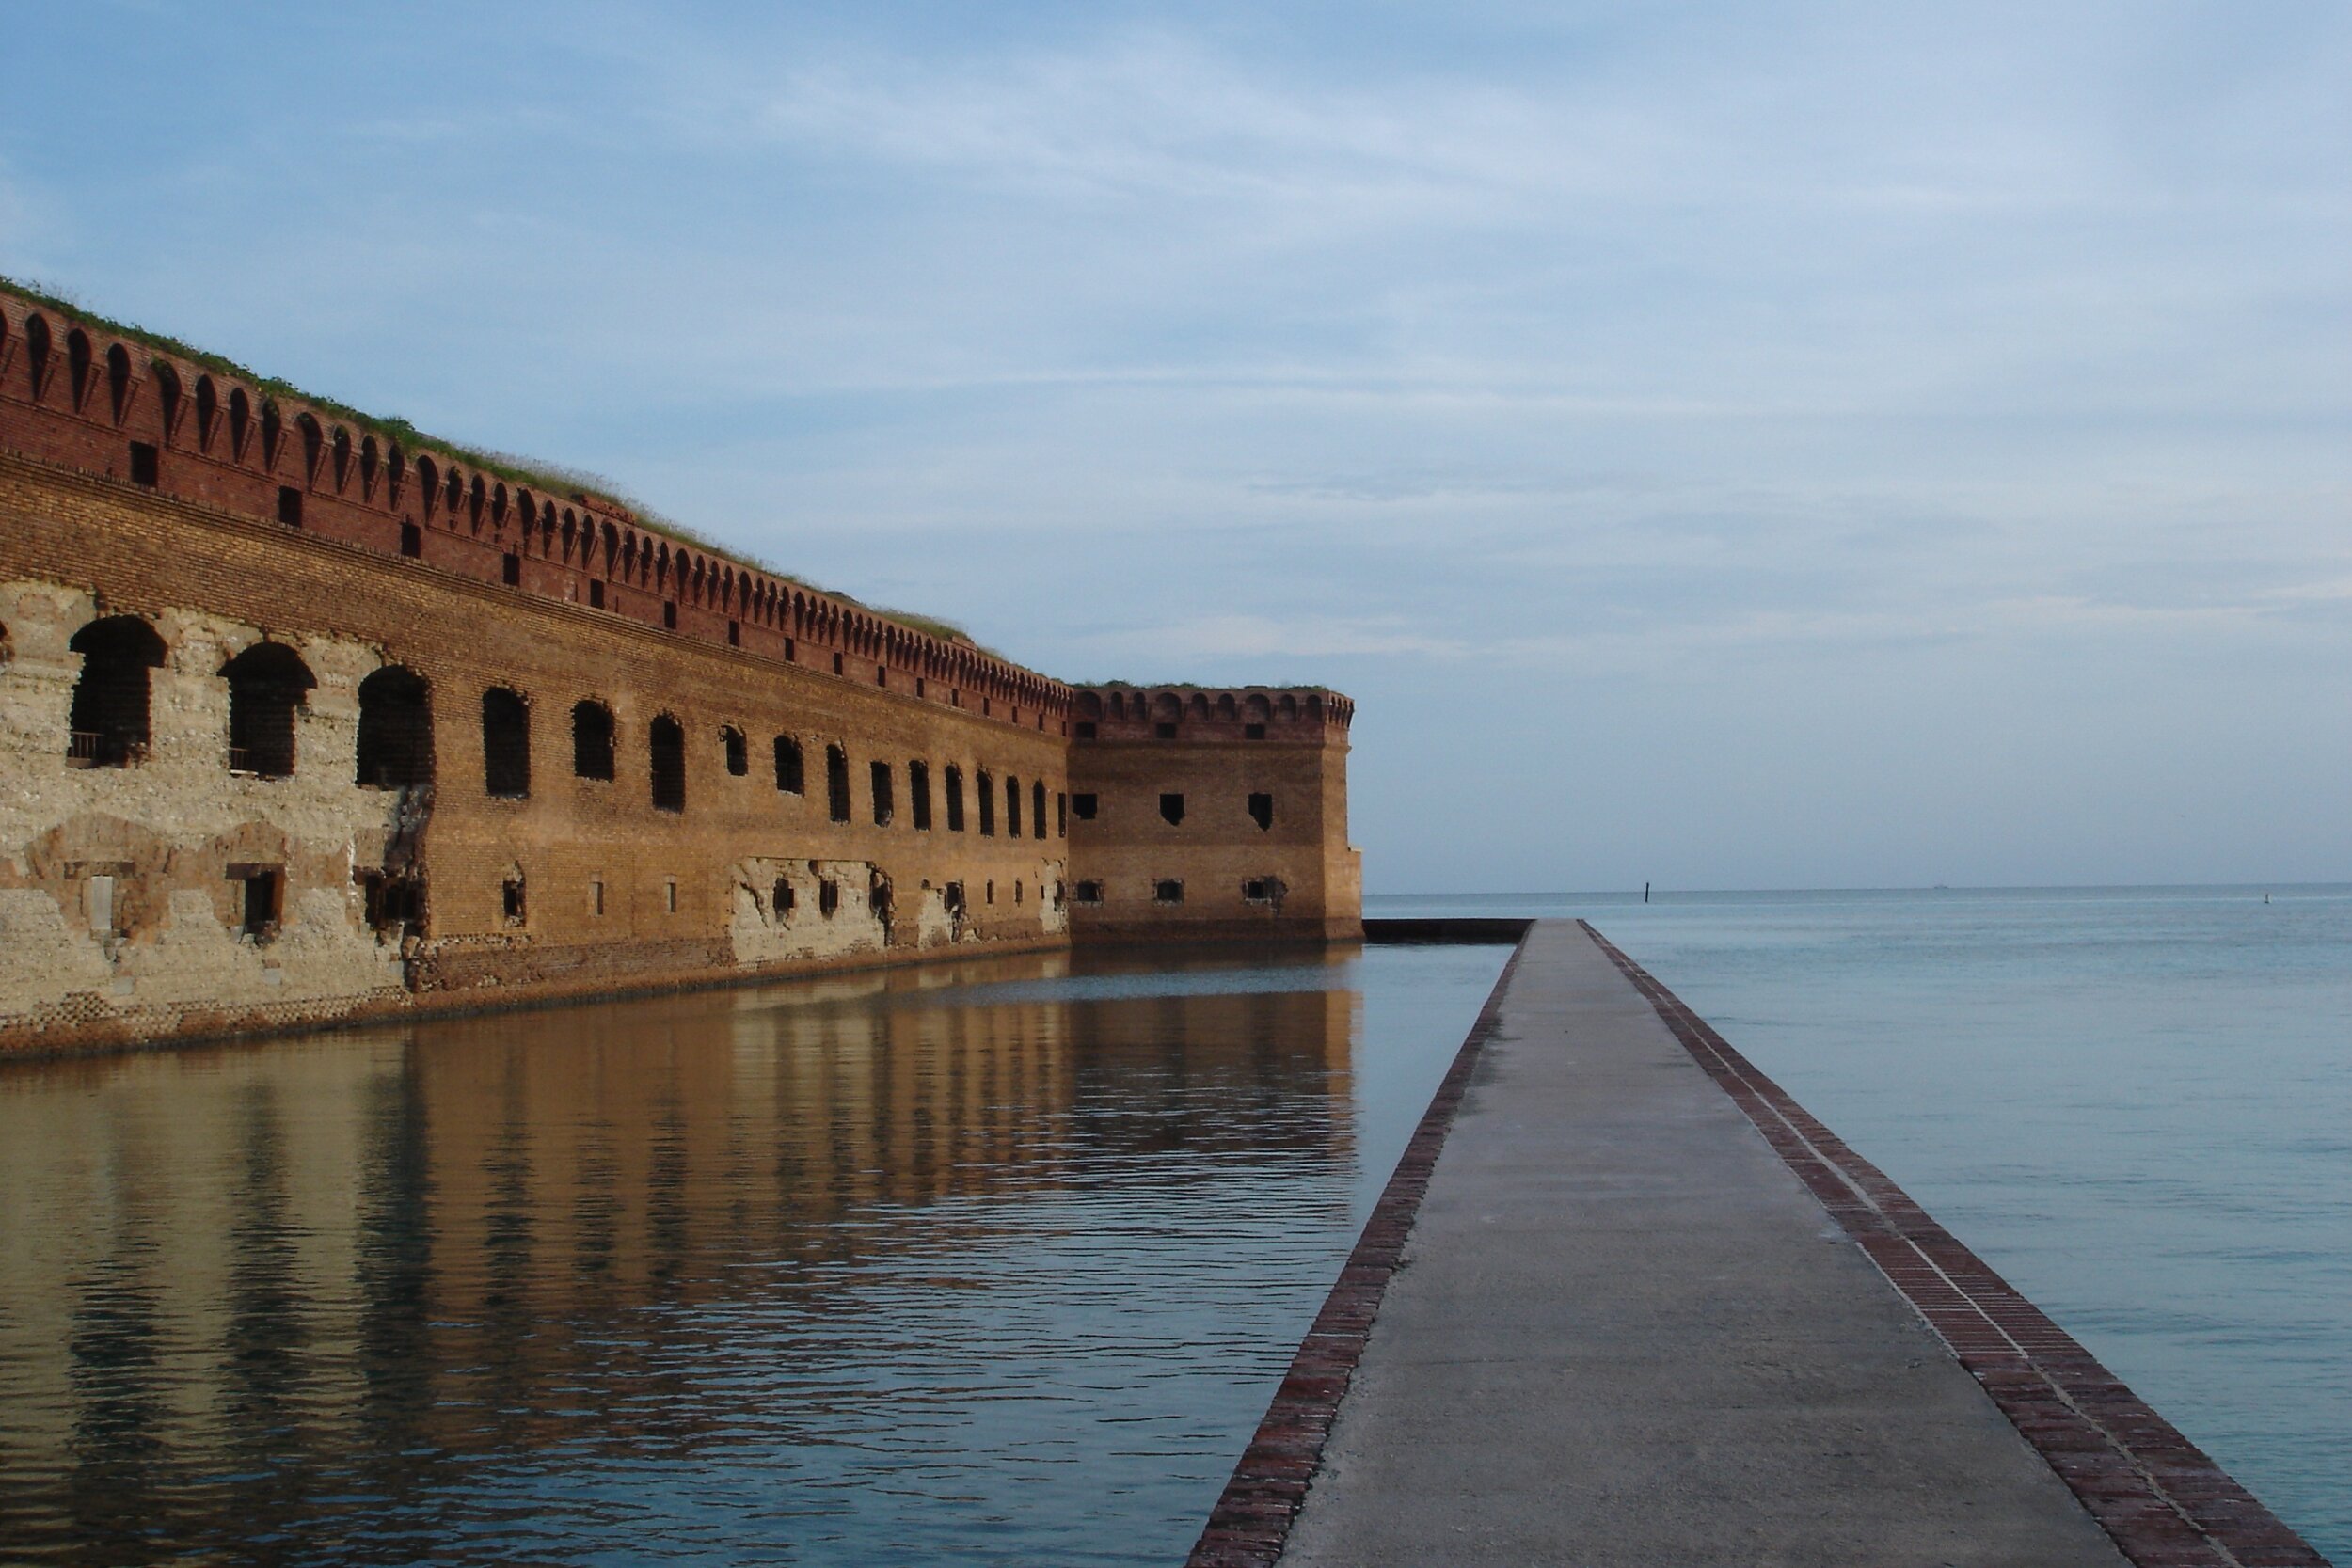 Historic Fort Jefferson is likely to be inundated by rising sea levels attributable to climate change.